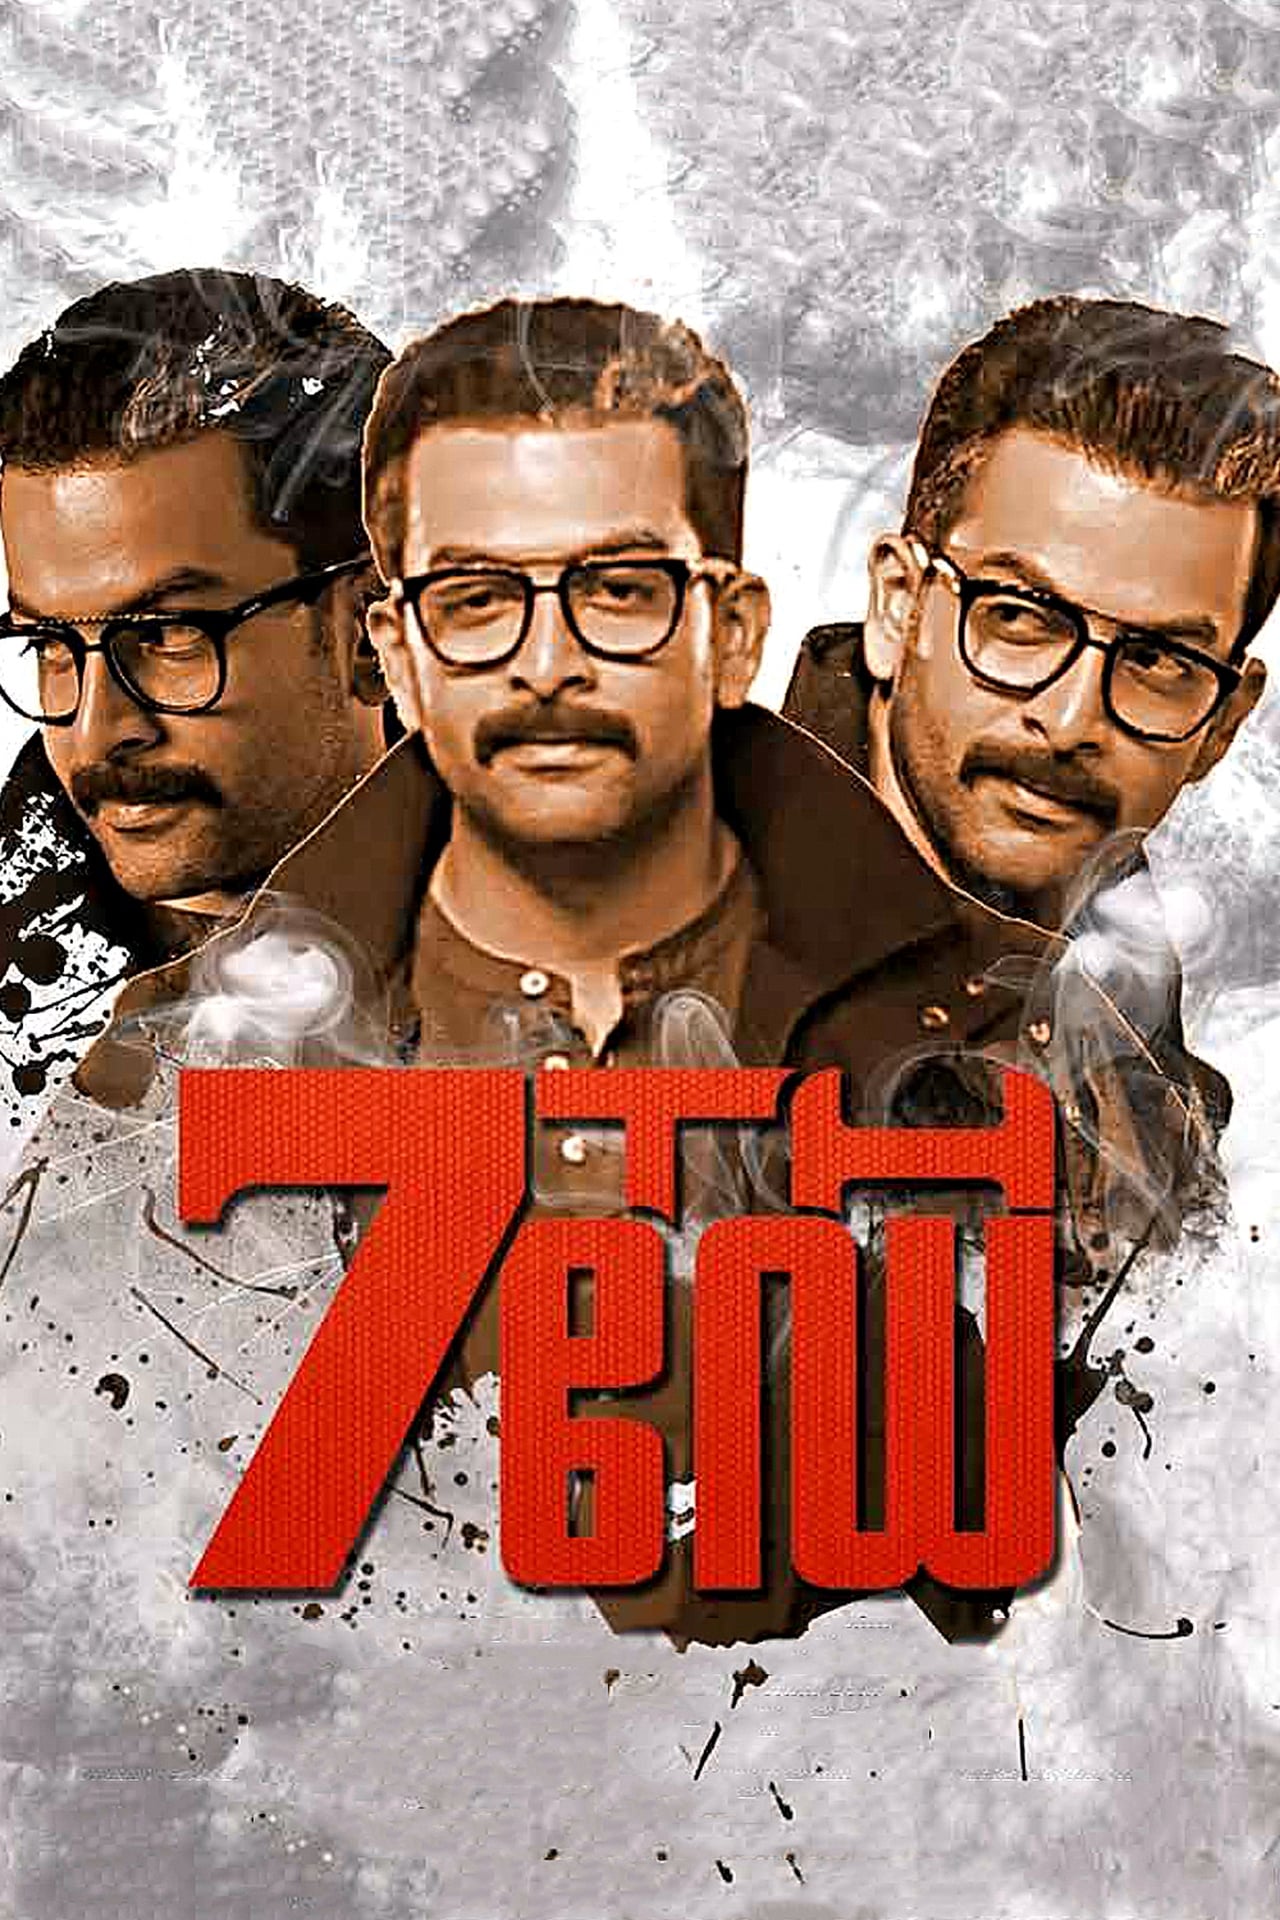 7th day movie review in tamil